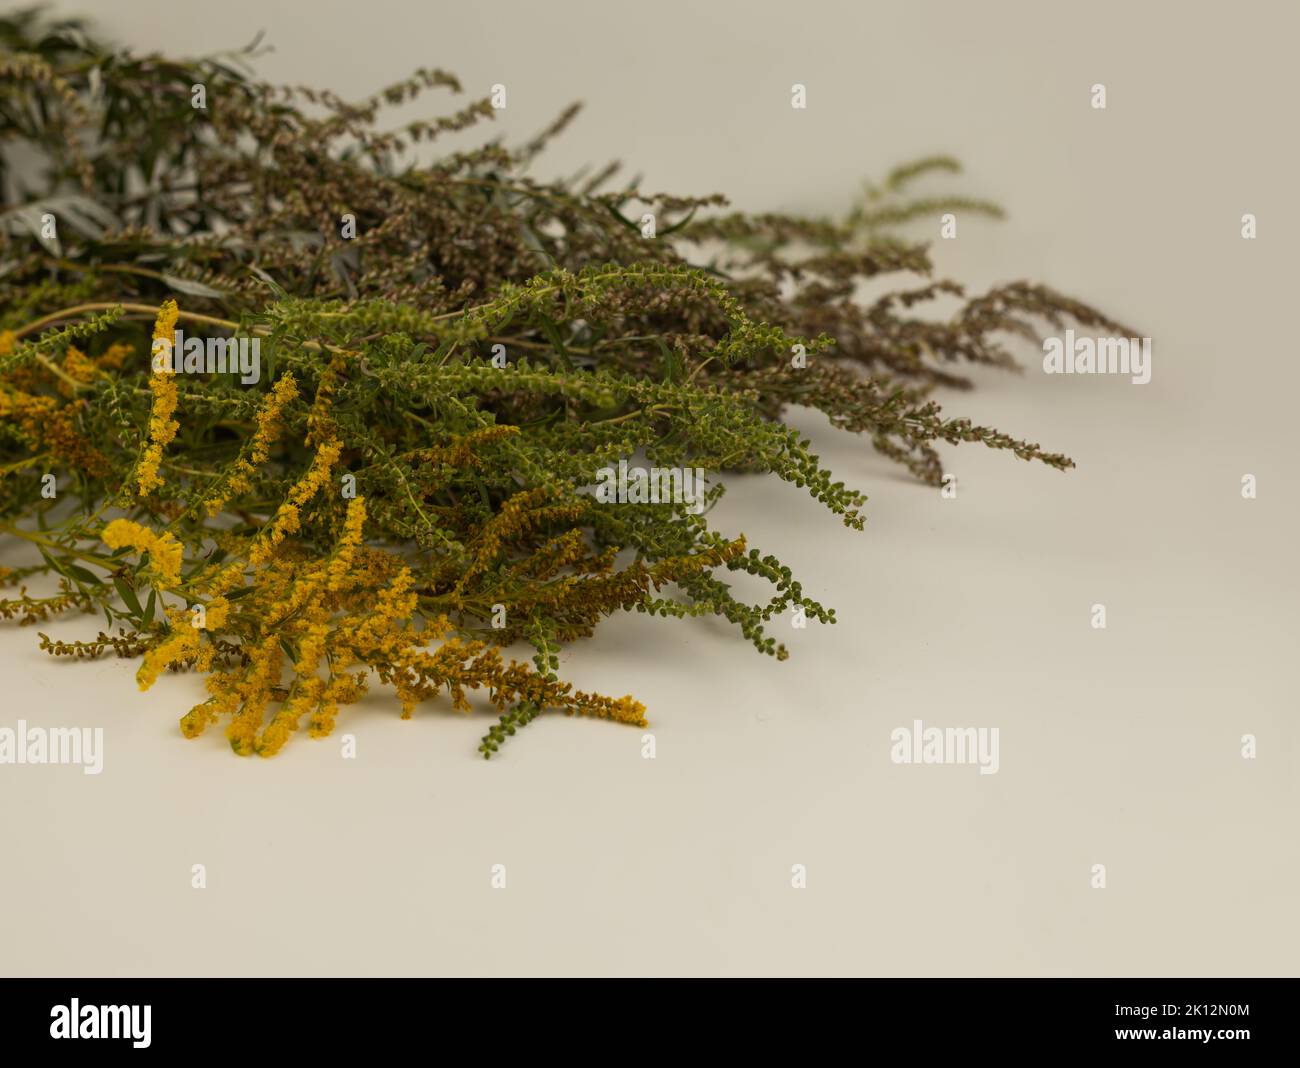 Bunch of ragweed, goldenrod and wormwood flowers. Blooming Ambrosia artemisiifolia is a dangerous allergenic plants, weed bushes pollen causes allergi Stock Photo